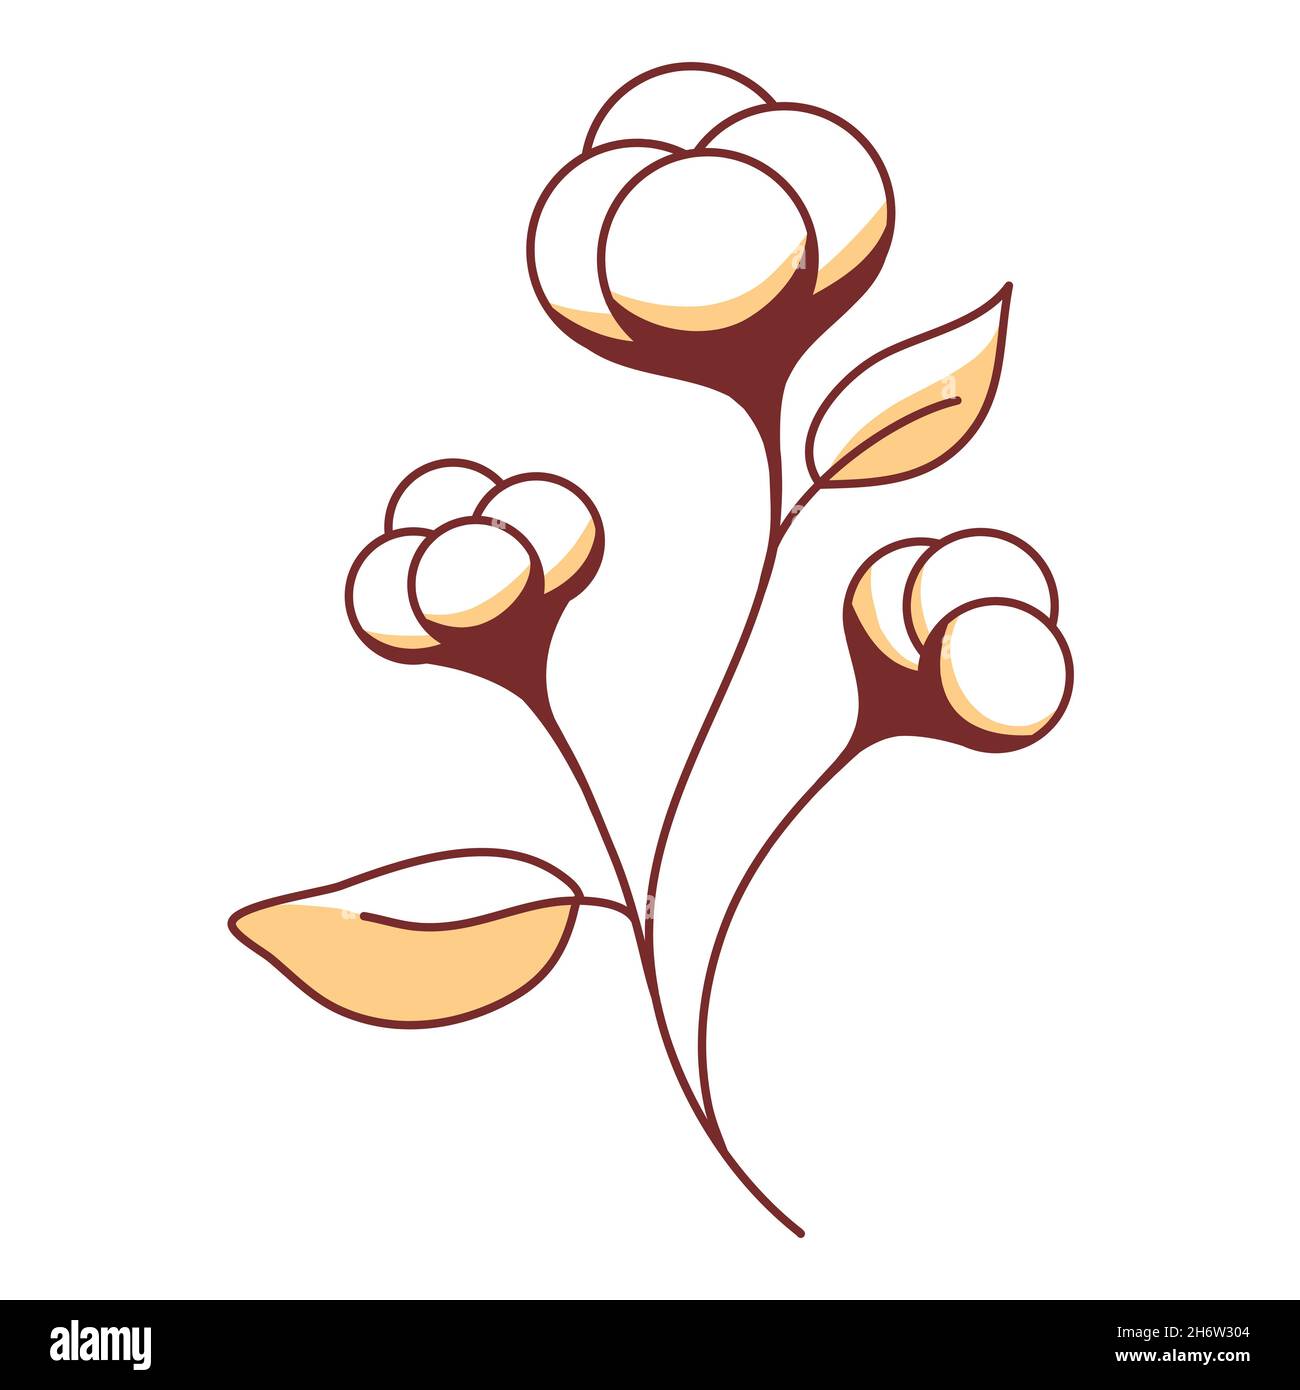 Cotton twig with boll, brown beige organic shape ripe cotton isolated plant vector illustration Stock Vector